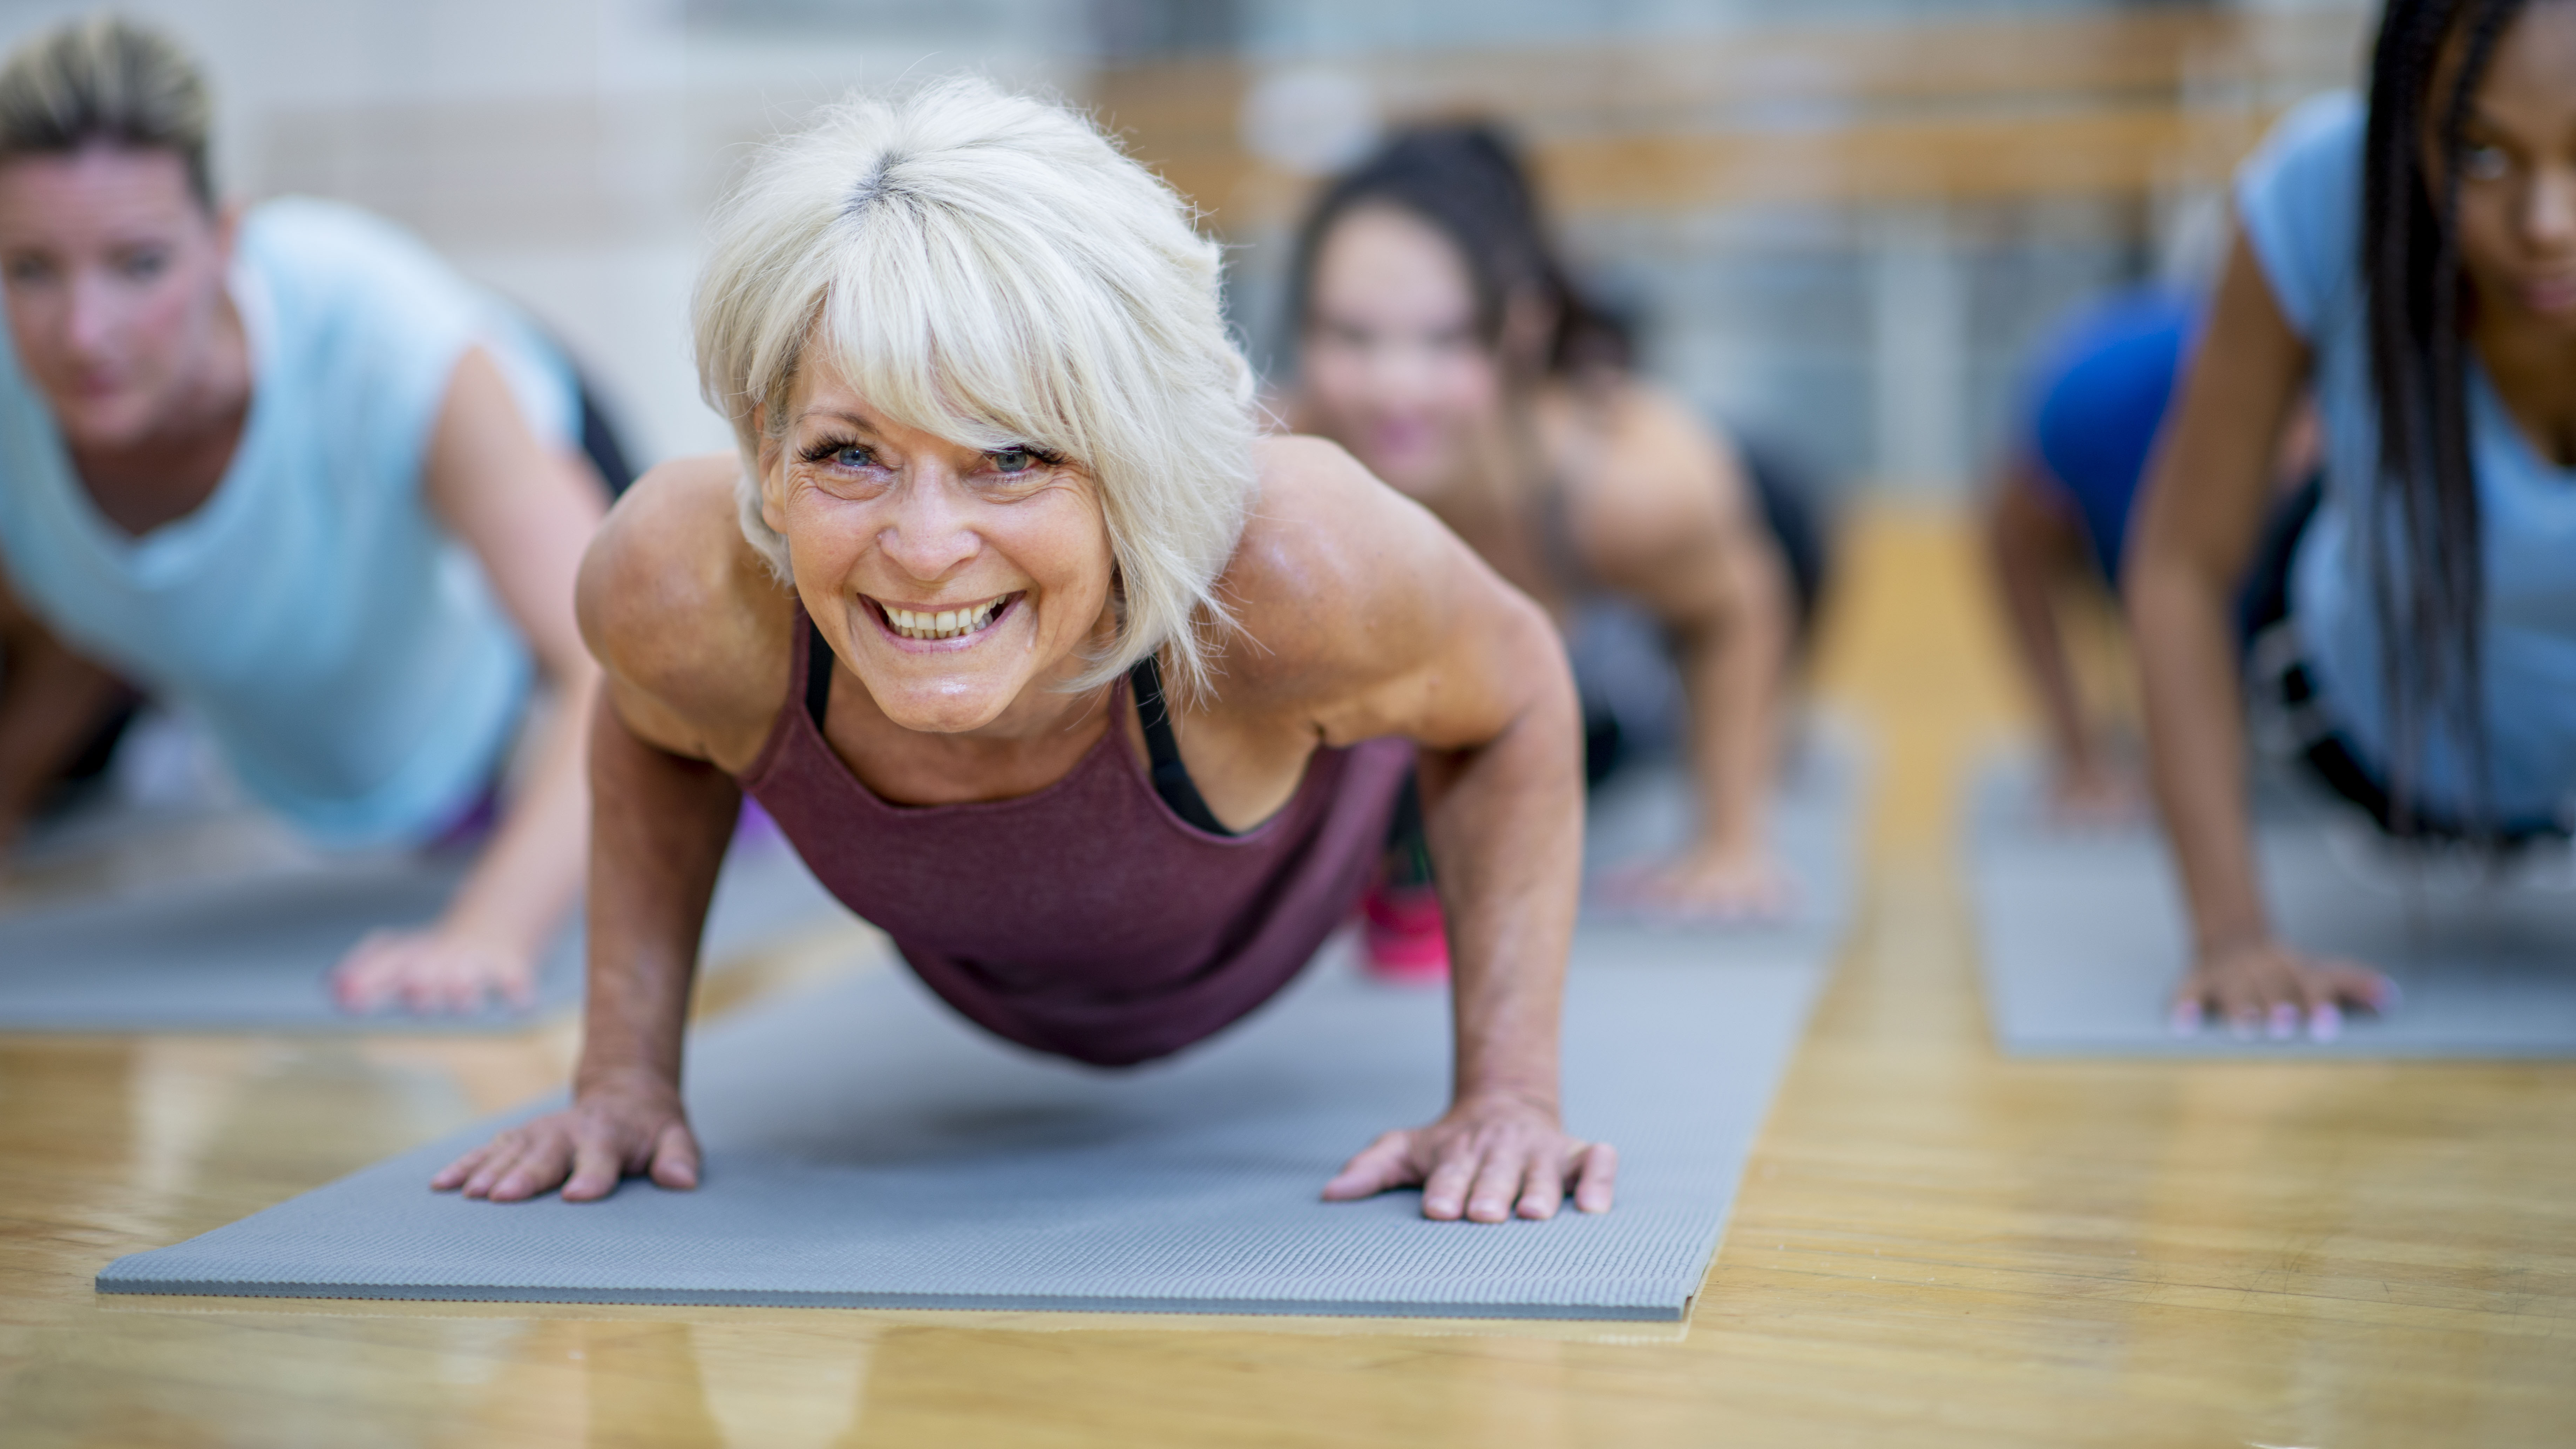 Senior woman doing plank in gym class